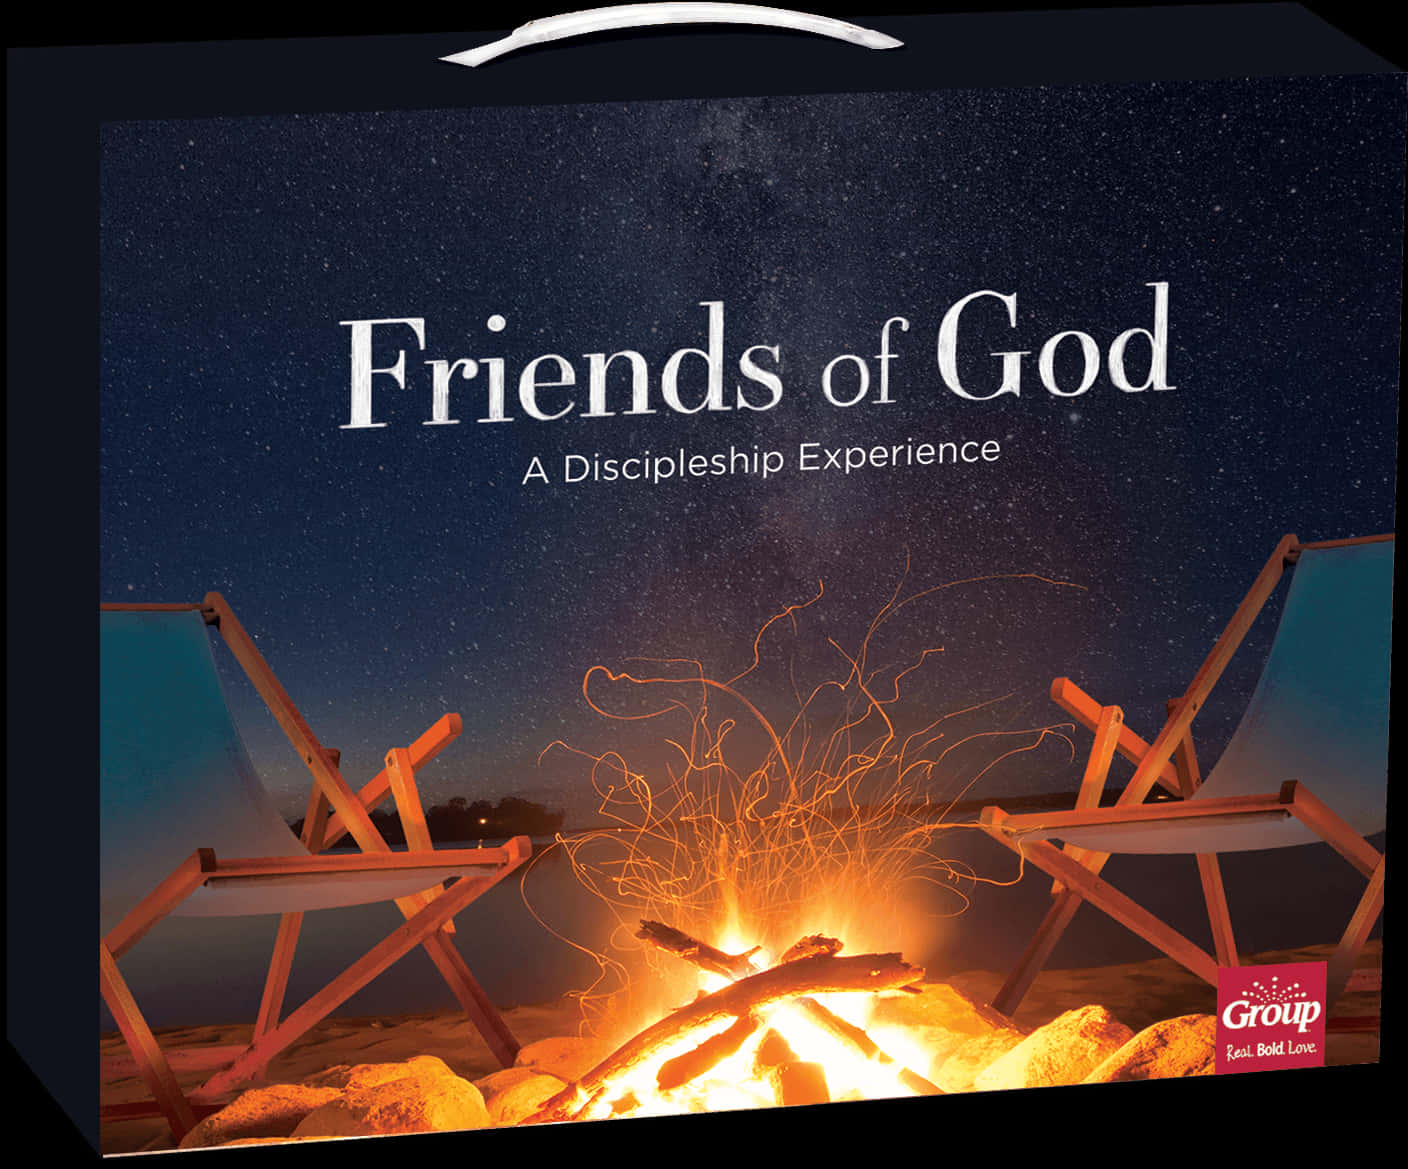 Friendsof God Discipleship Experience PNG image